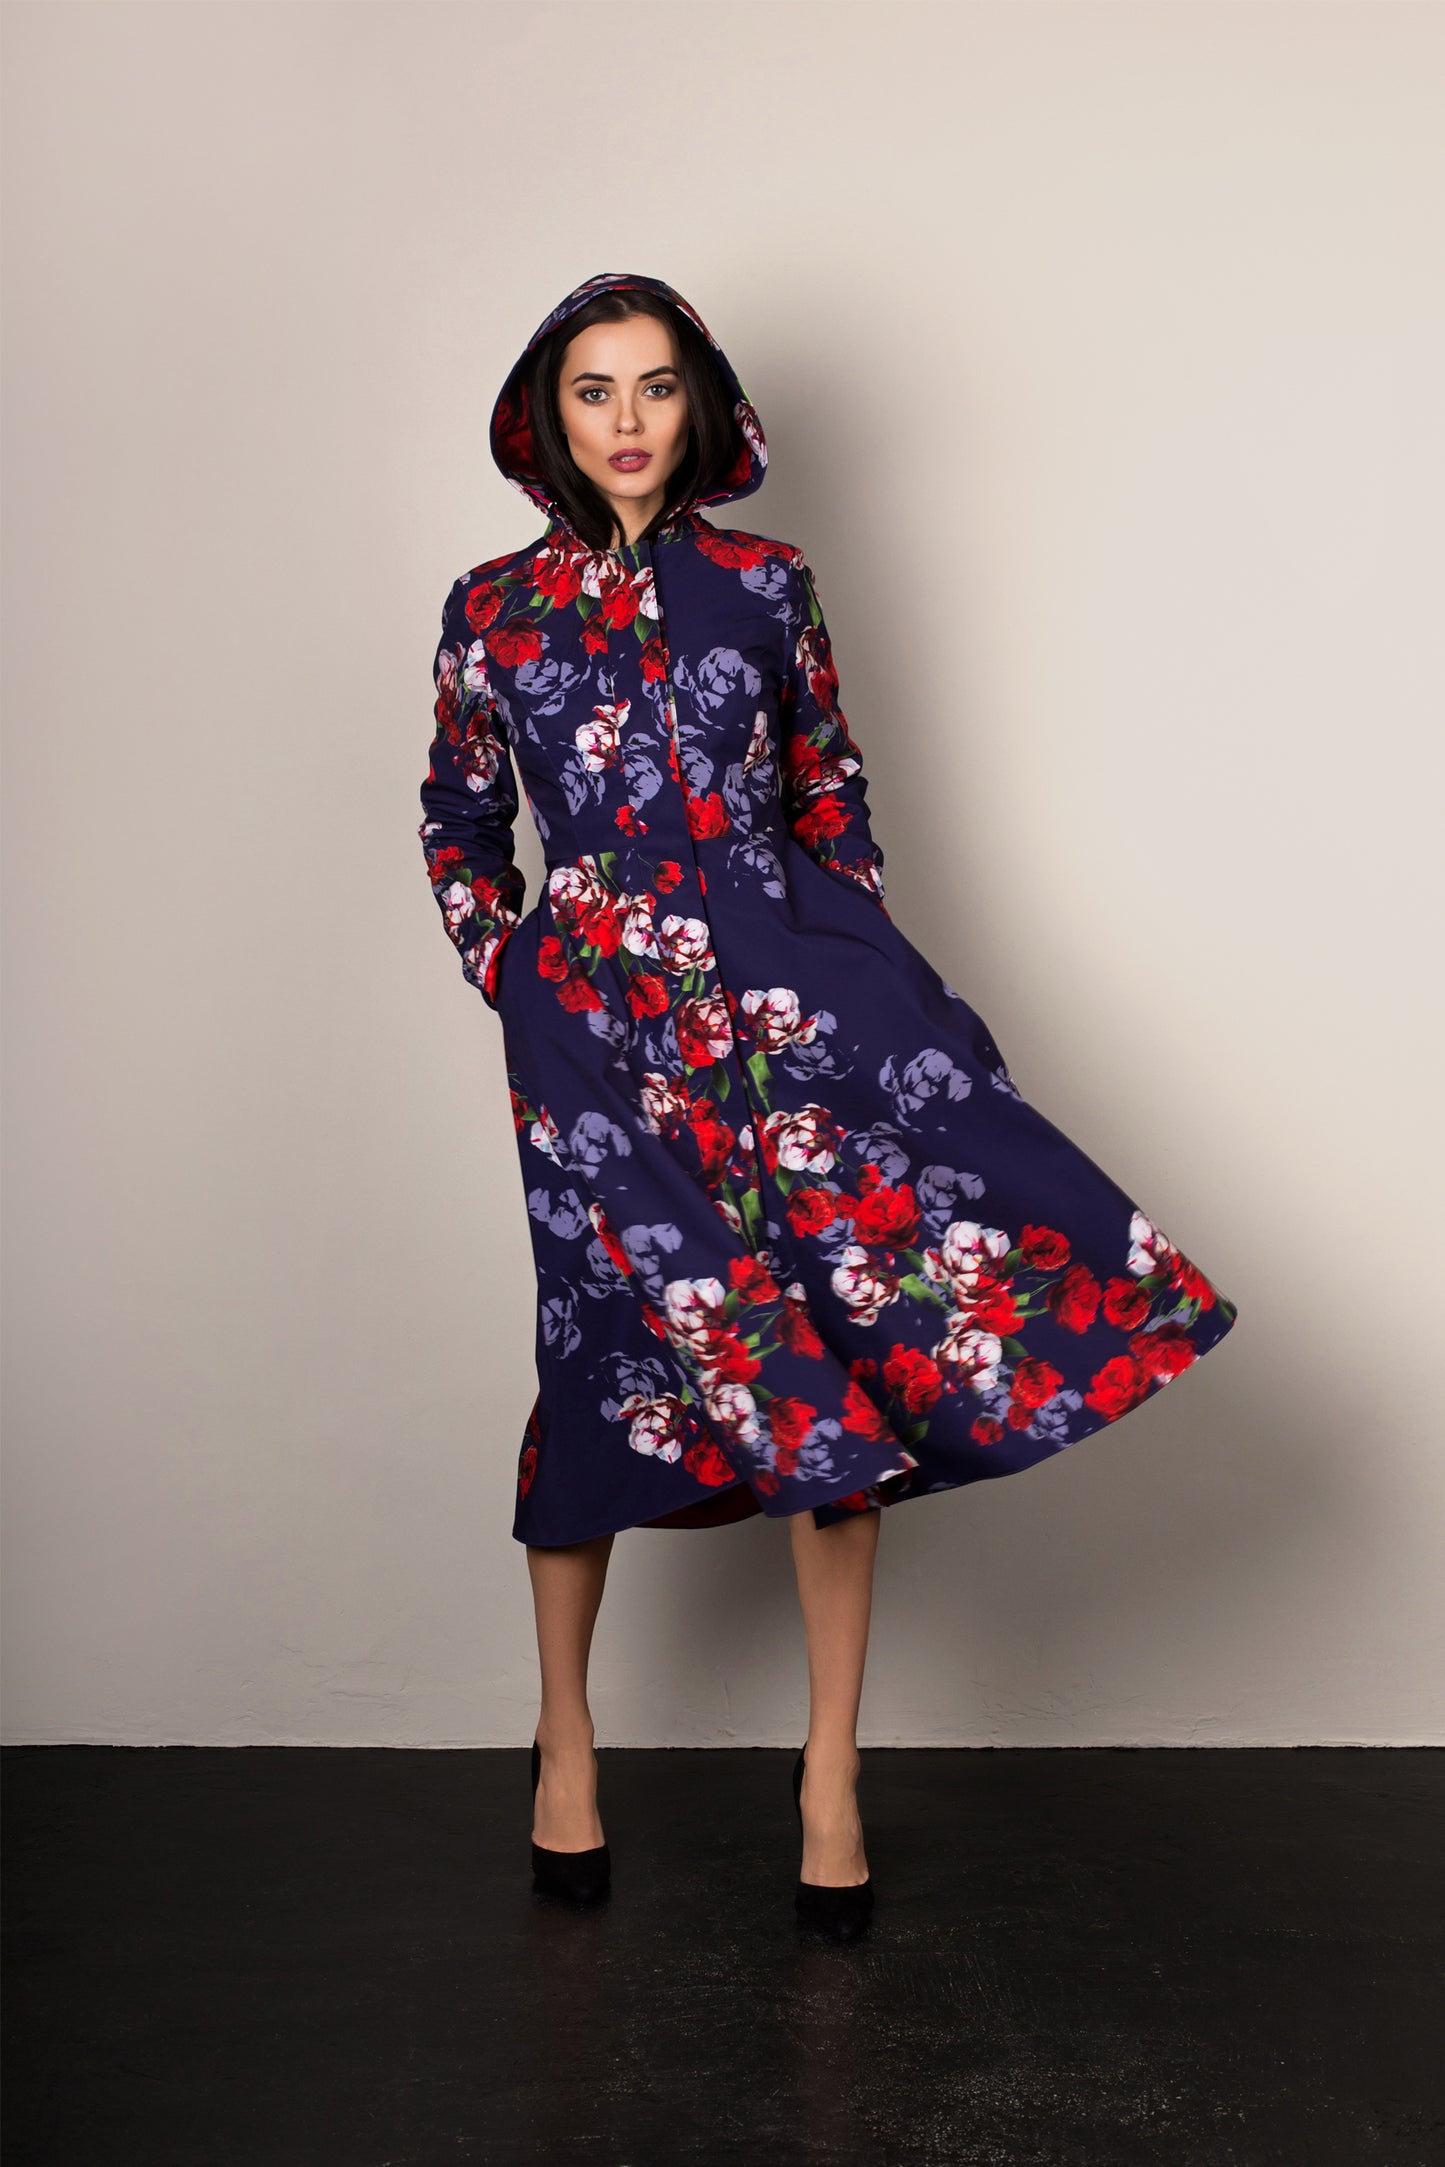 Hooded Blue and Red Designer Coat with Floral Print